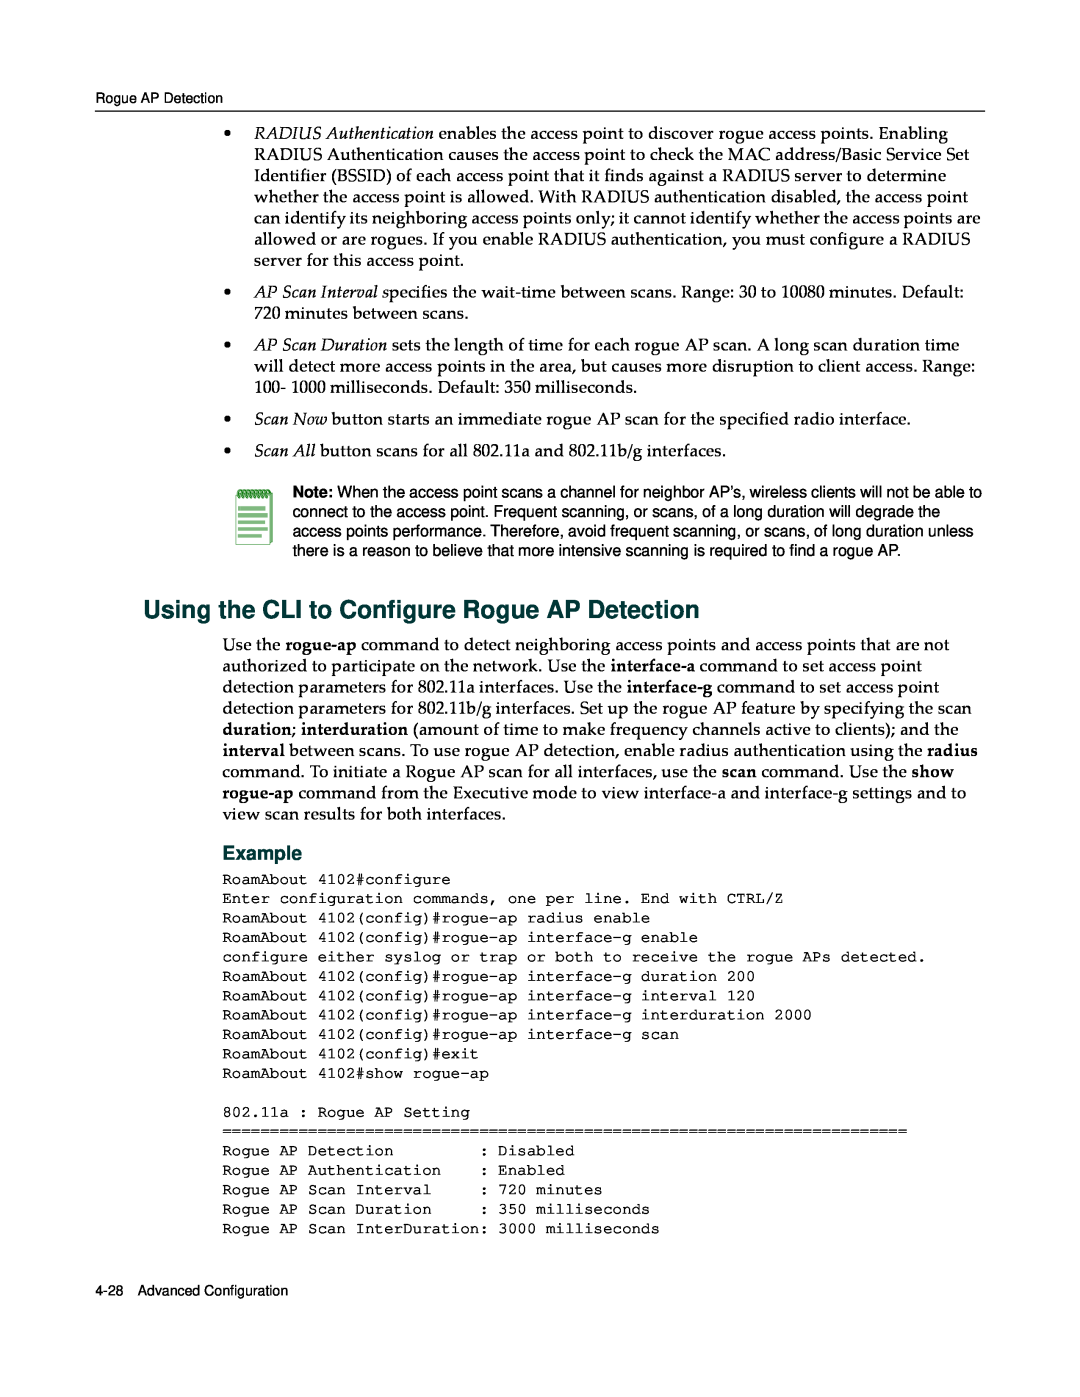 Enterasys Networks RBT-4102 manual Using the CLI to Configure Rogue AP Detection, Example 